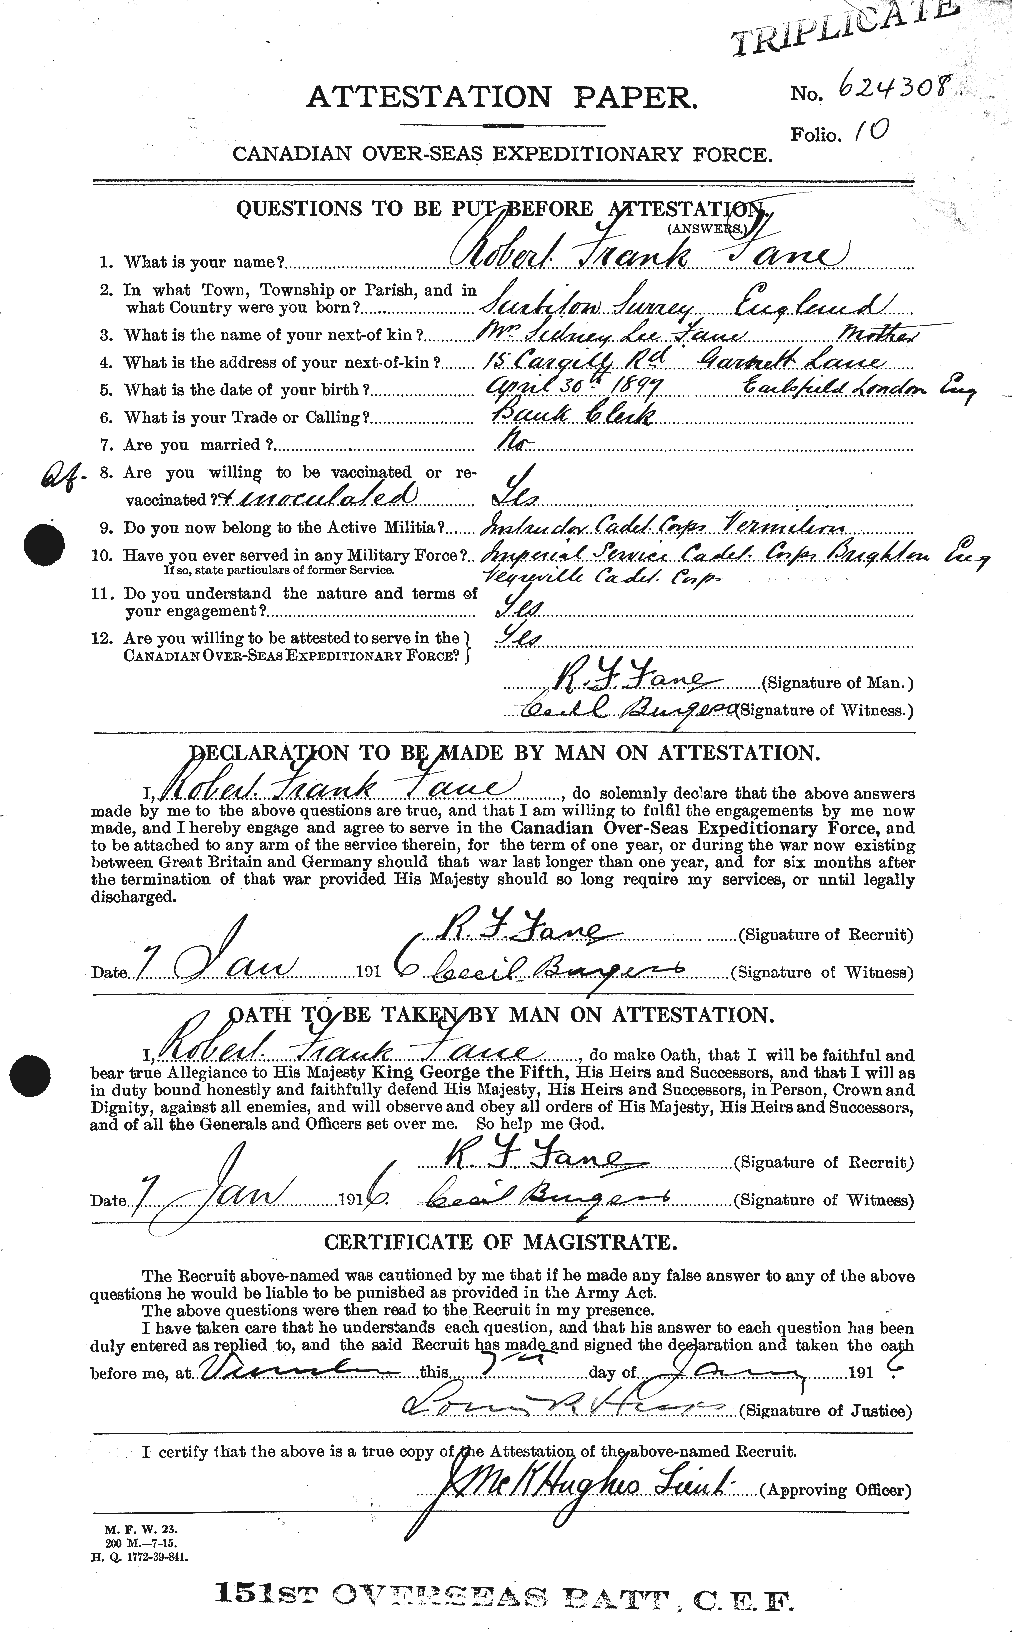 Personnel Records of the First World War - CEF 319863a